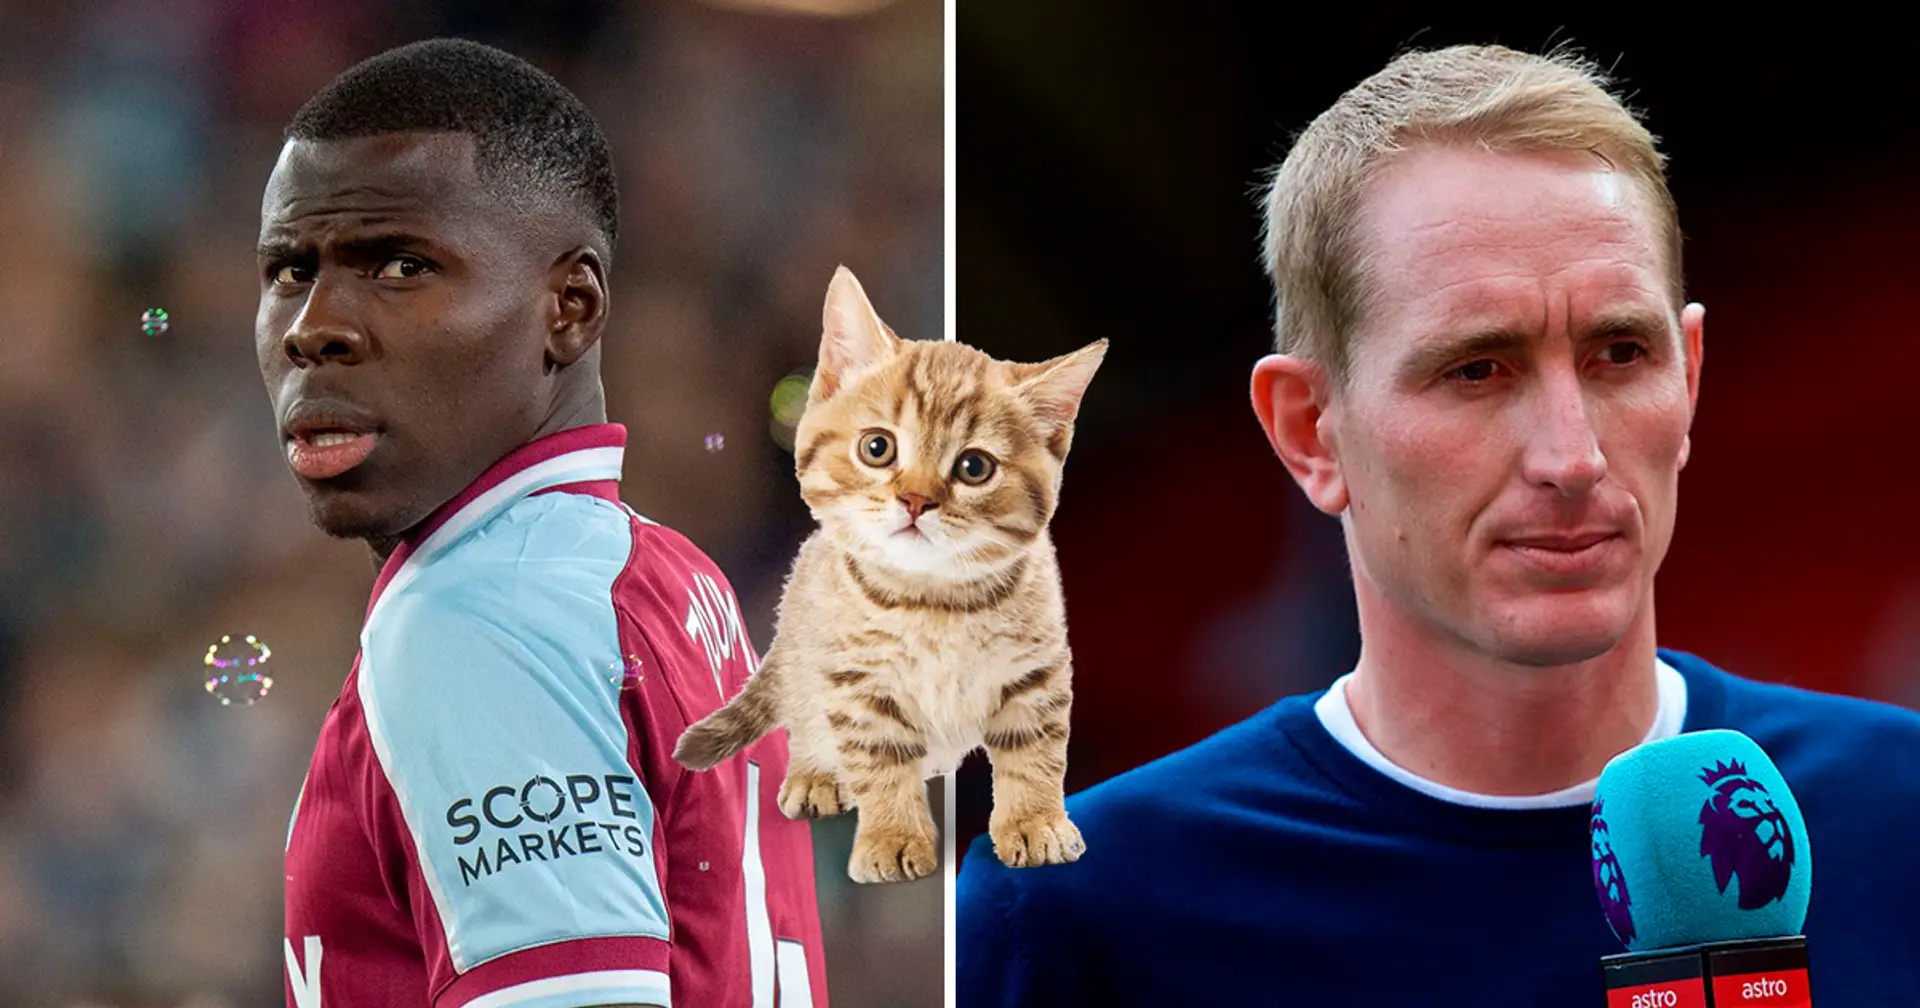 Former England goalkeeper says kicking a cat is WORSE than racism